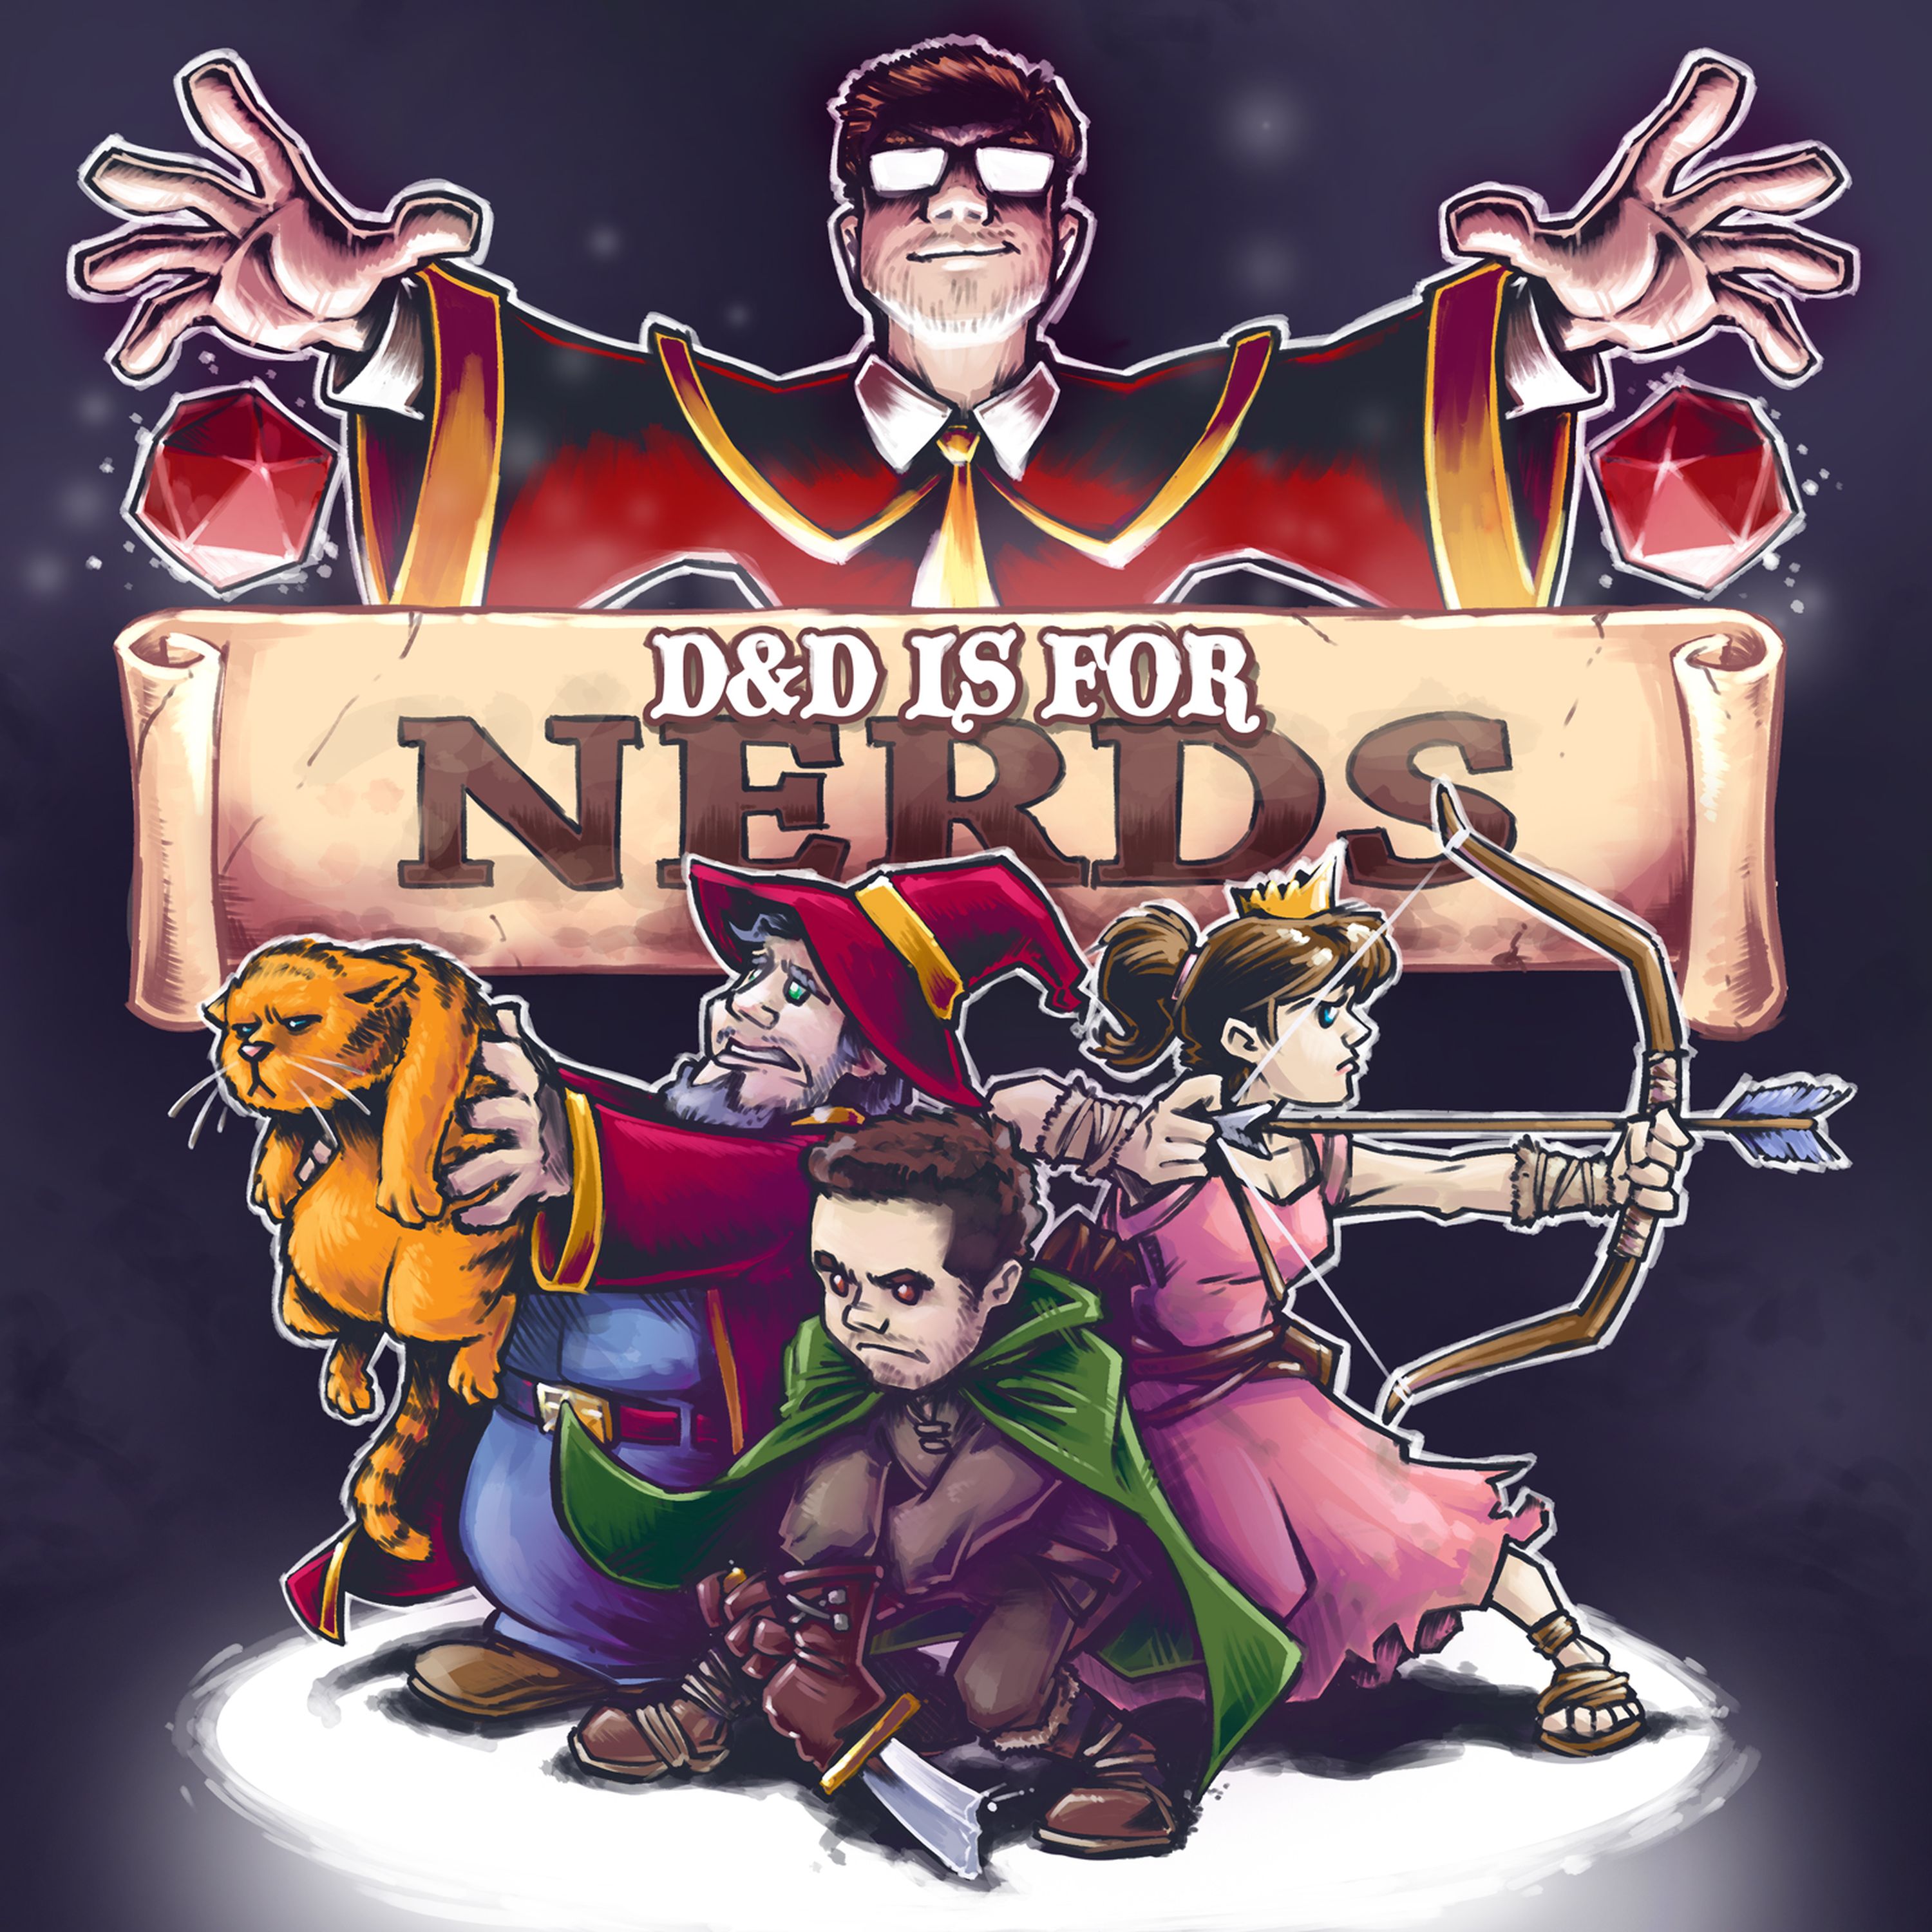 D&D is For Nerds Promo #1